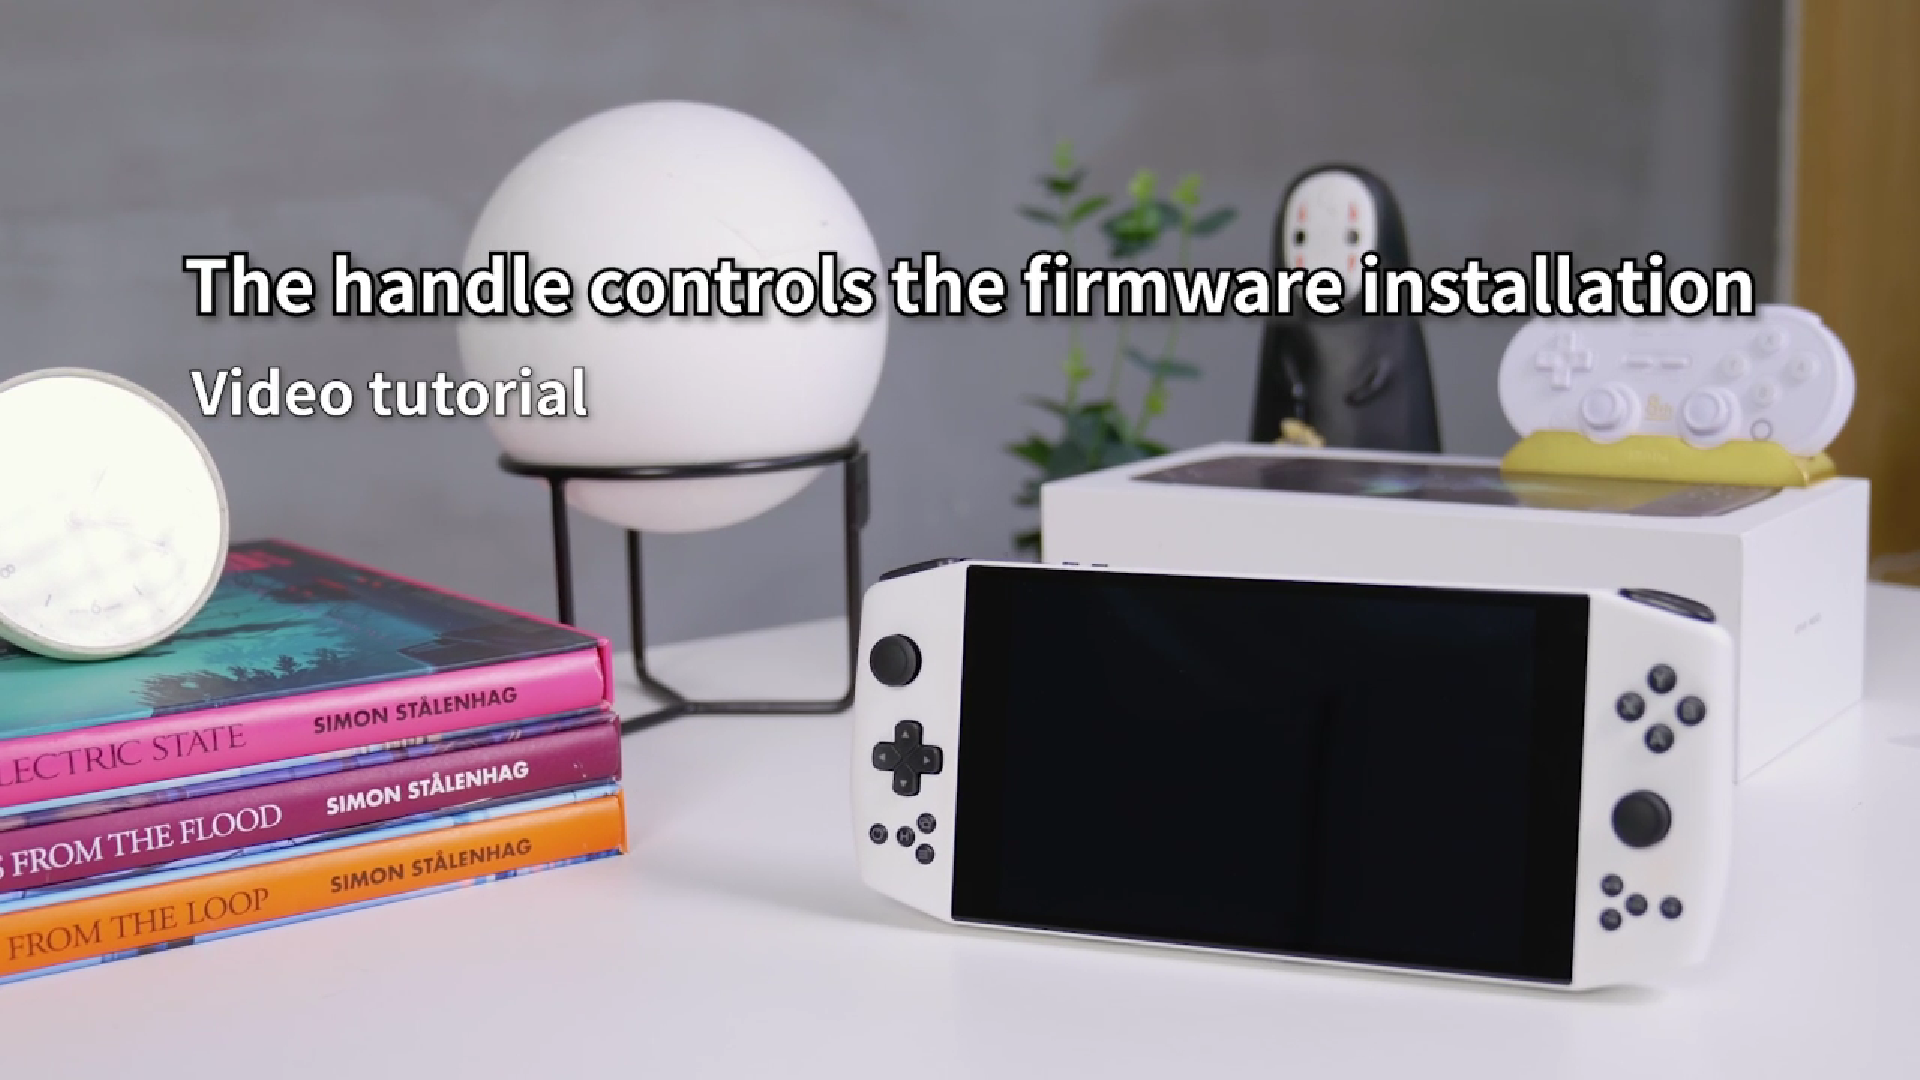 The handle controls the firmware installation